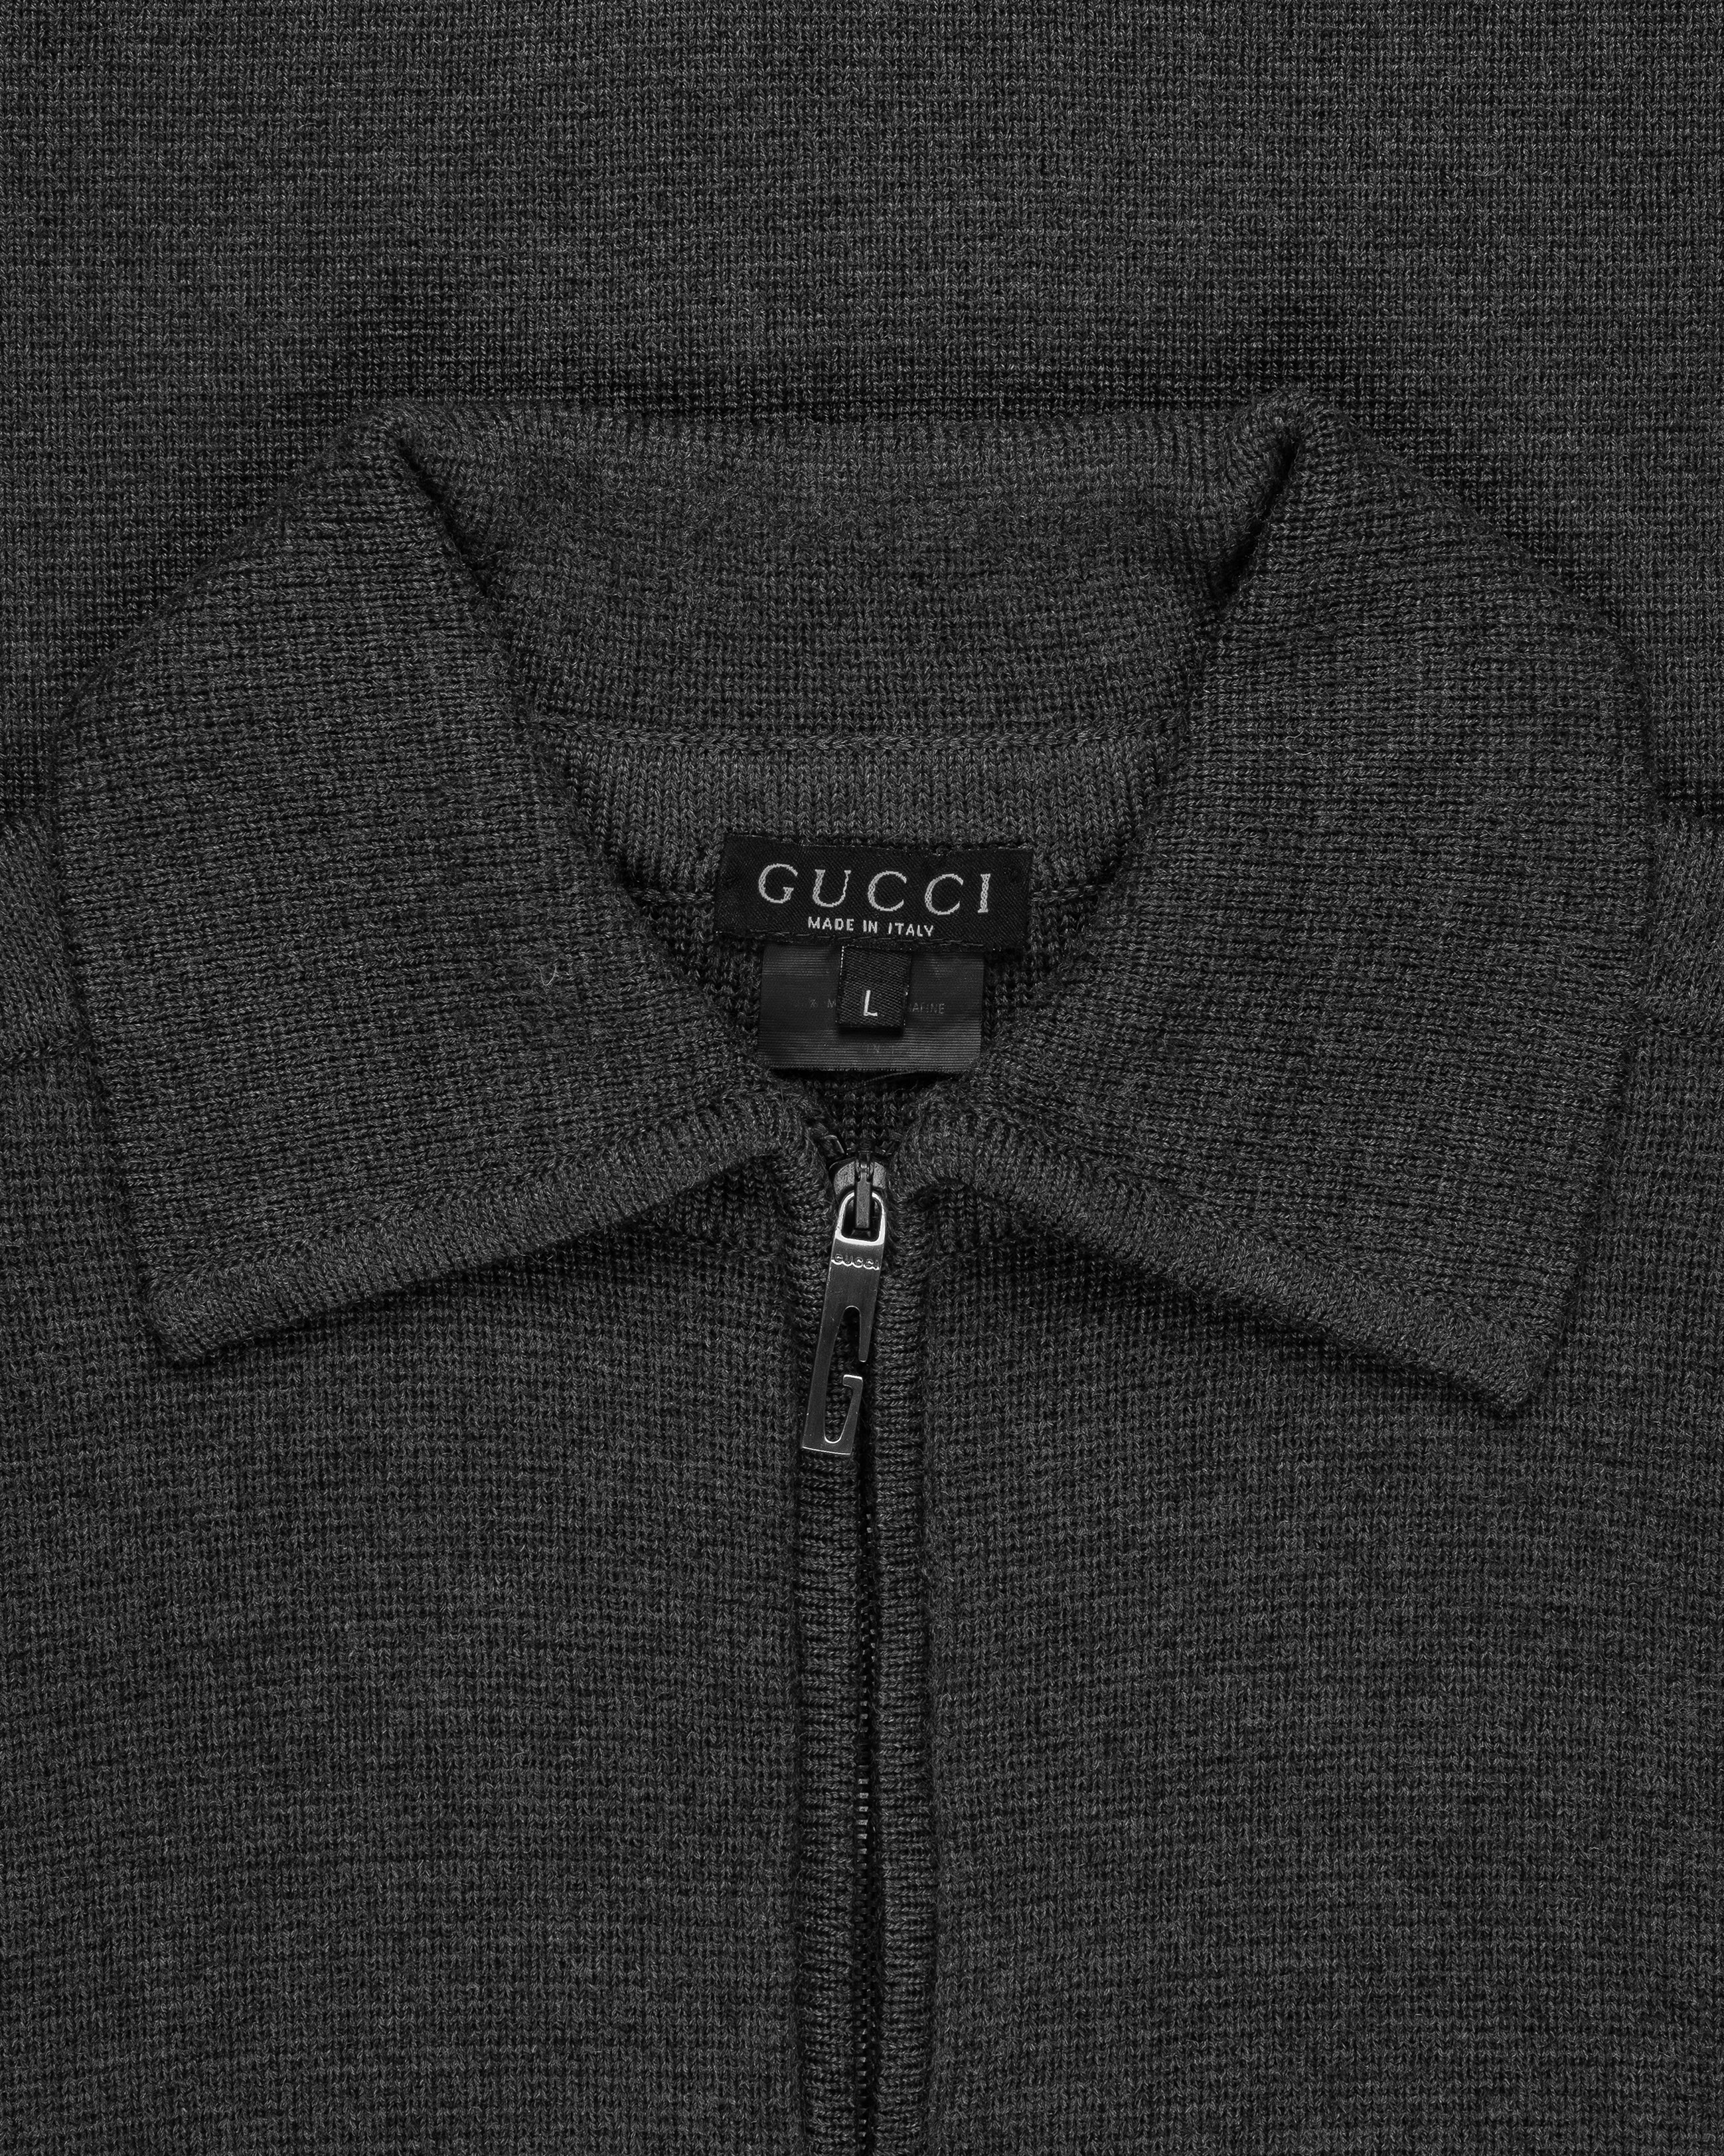 Gucci by Tom Ford Charcoal Grey Driver's Knit Zip-Up Sweater